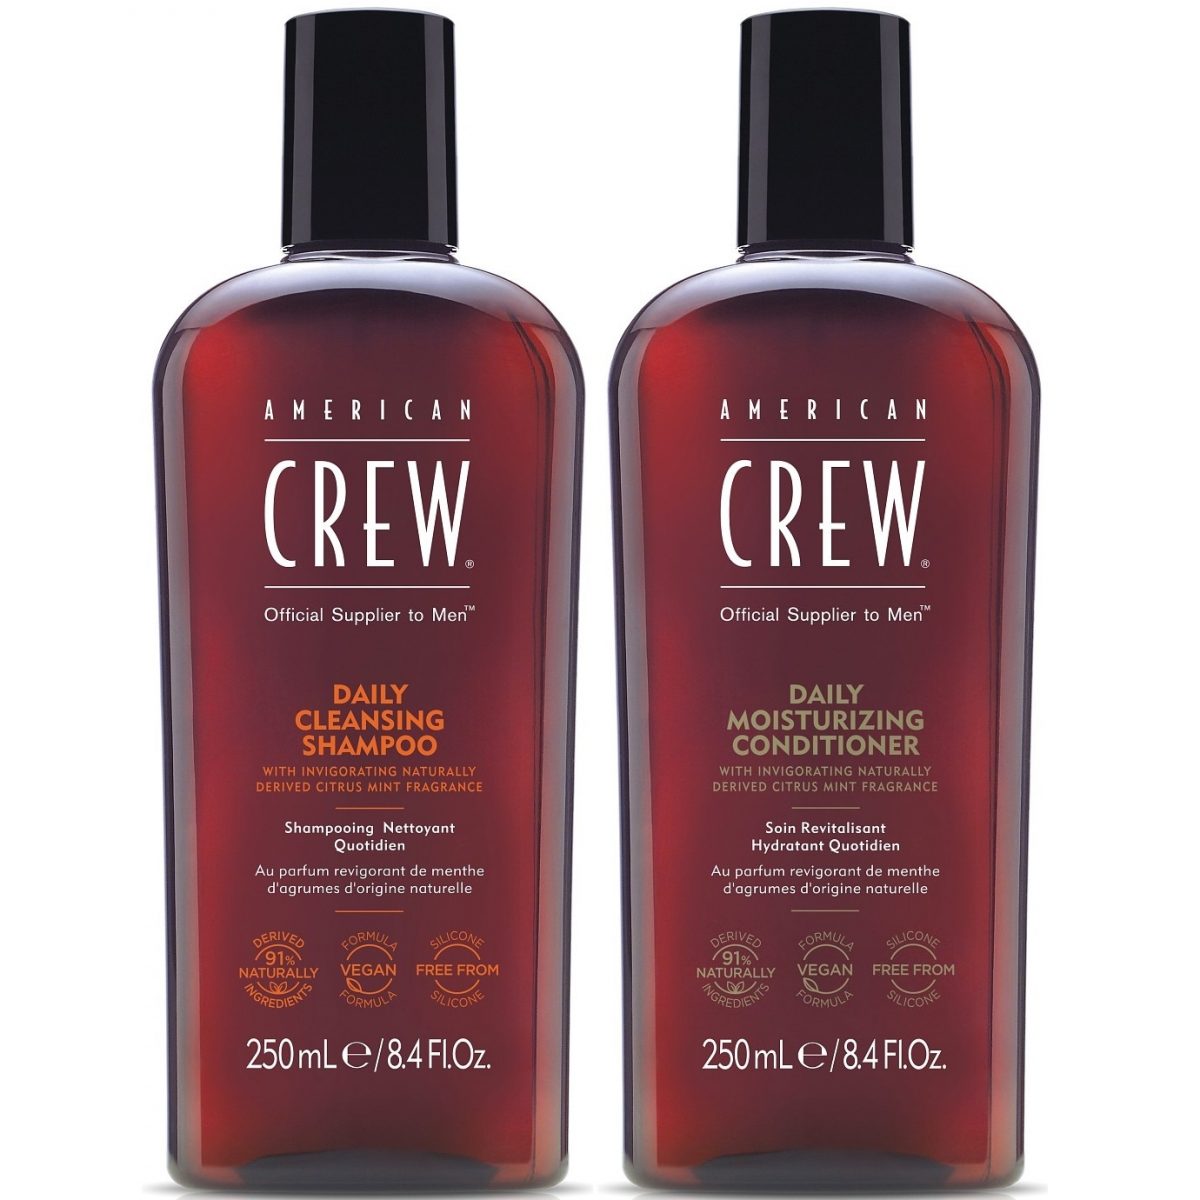 19_Emphase_American_Crew_Daily_Cleansing_Shampoo_250ml_Daily_Moisturizing_Conditioner_250ml